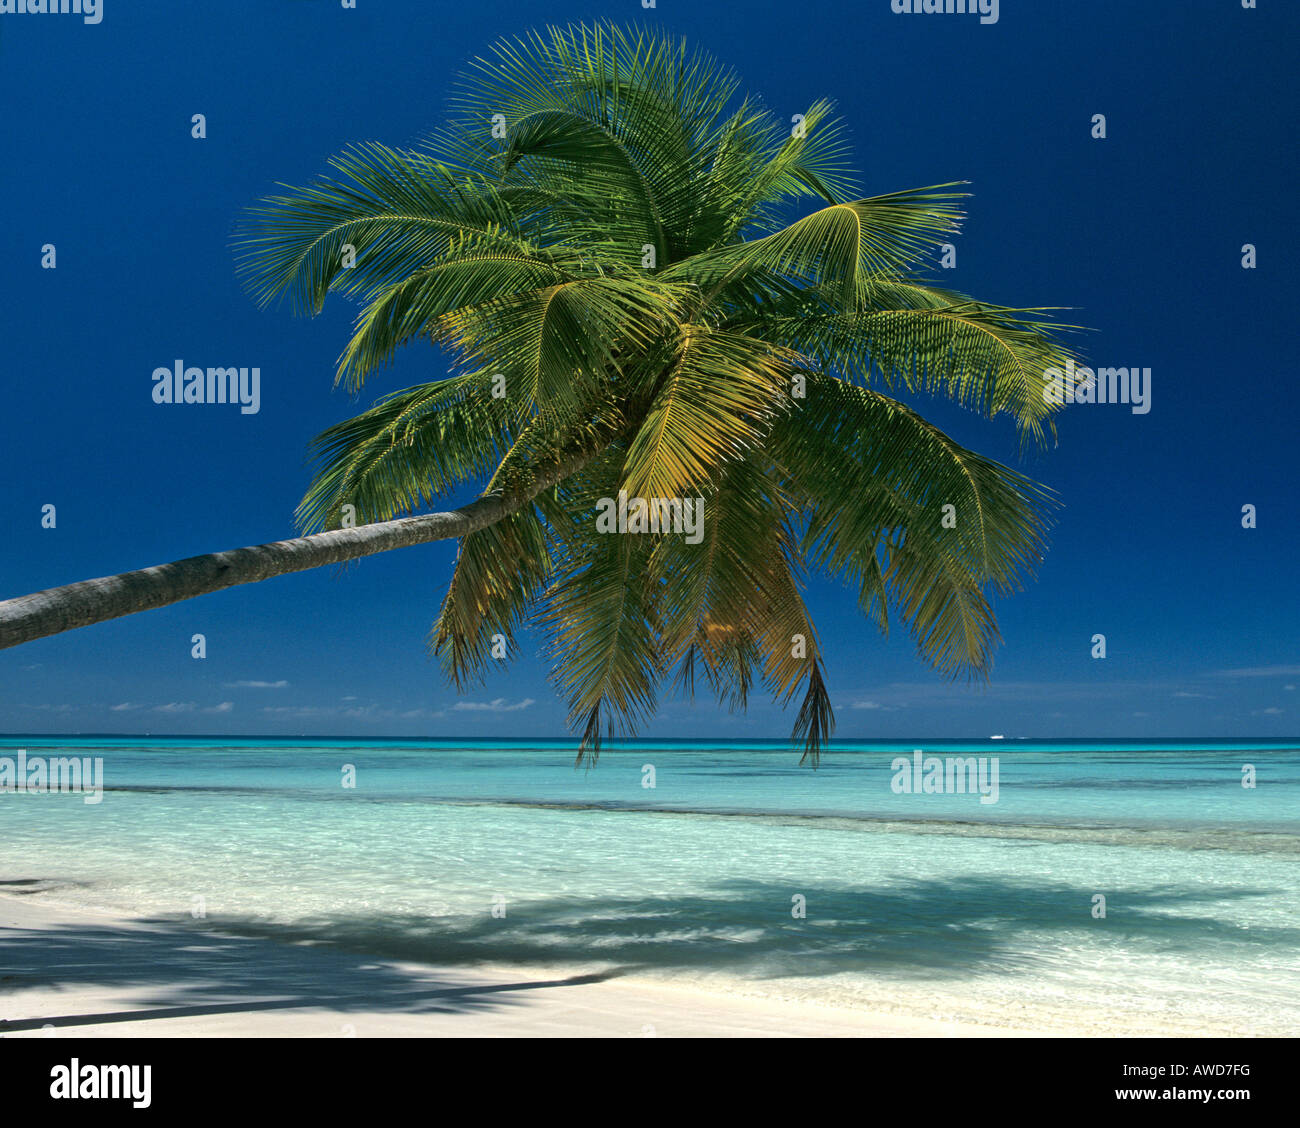 Palm tree on the beach hanging over the water, Maldives, Indian Ocean Stock Photo